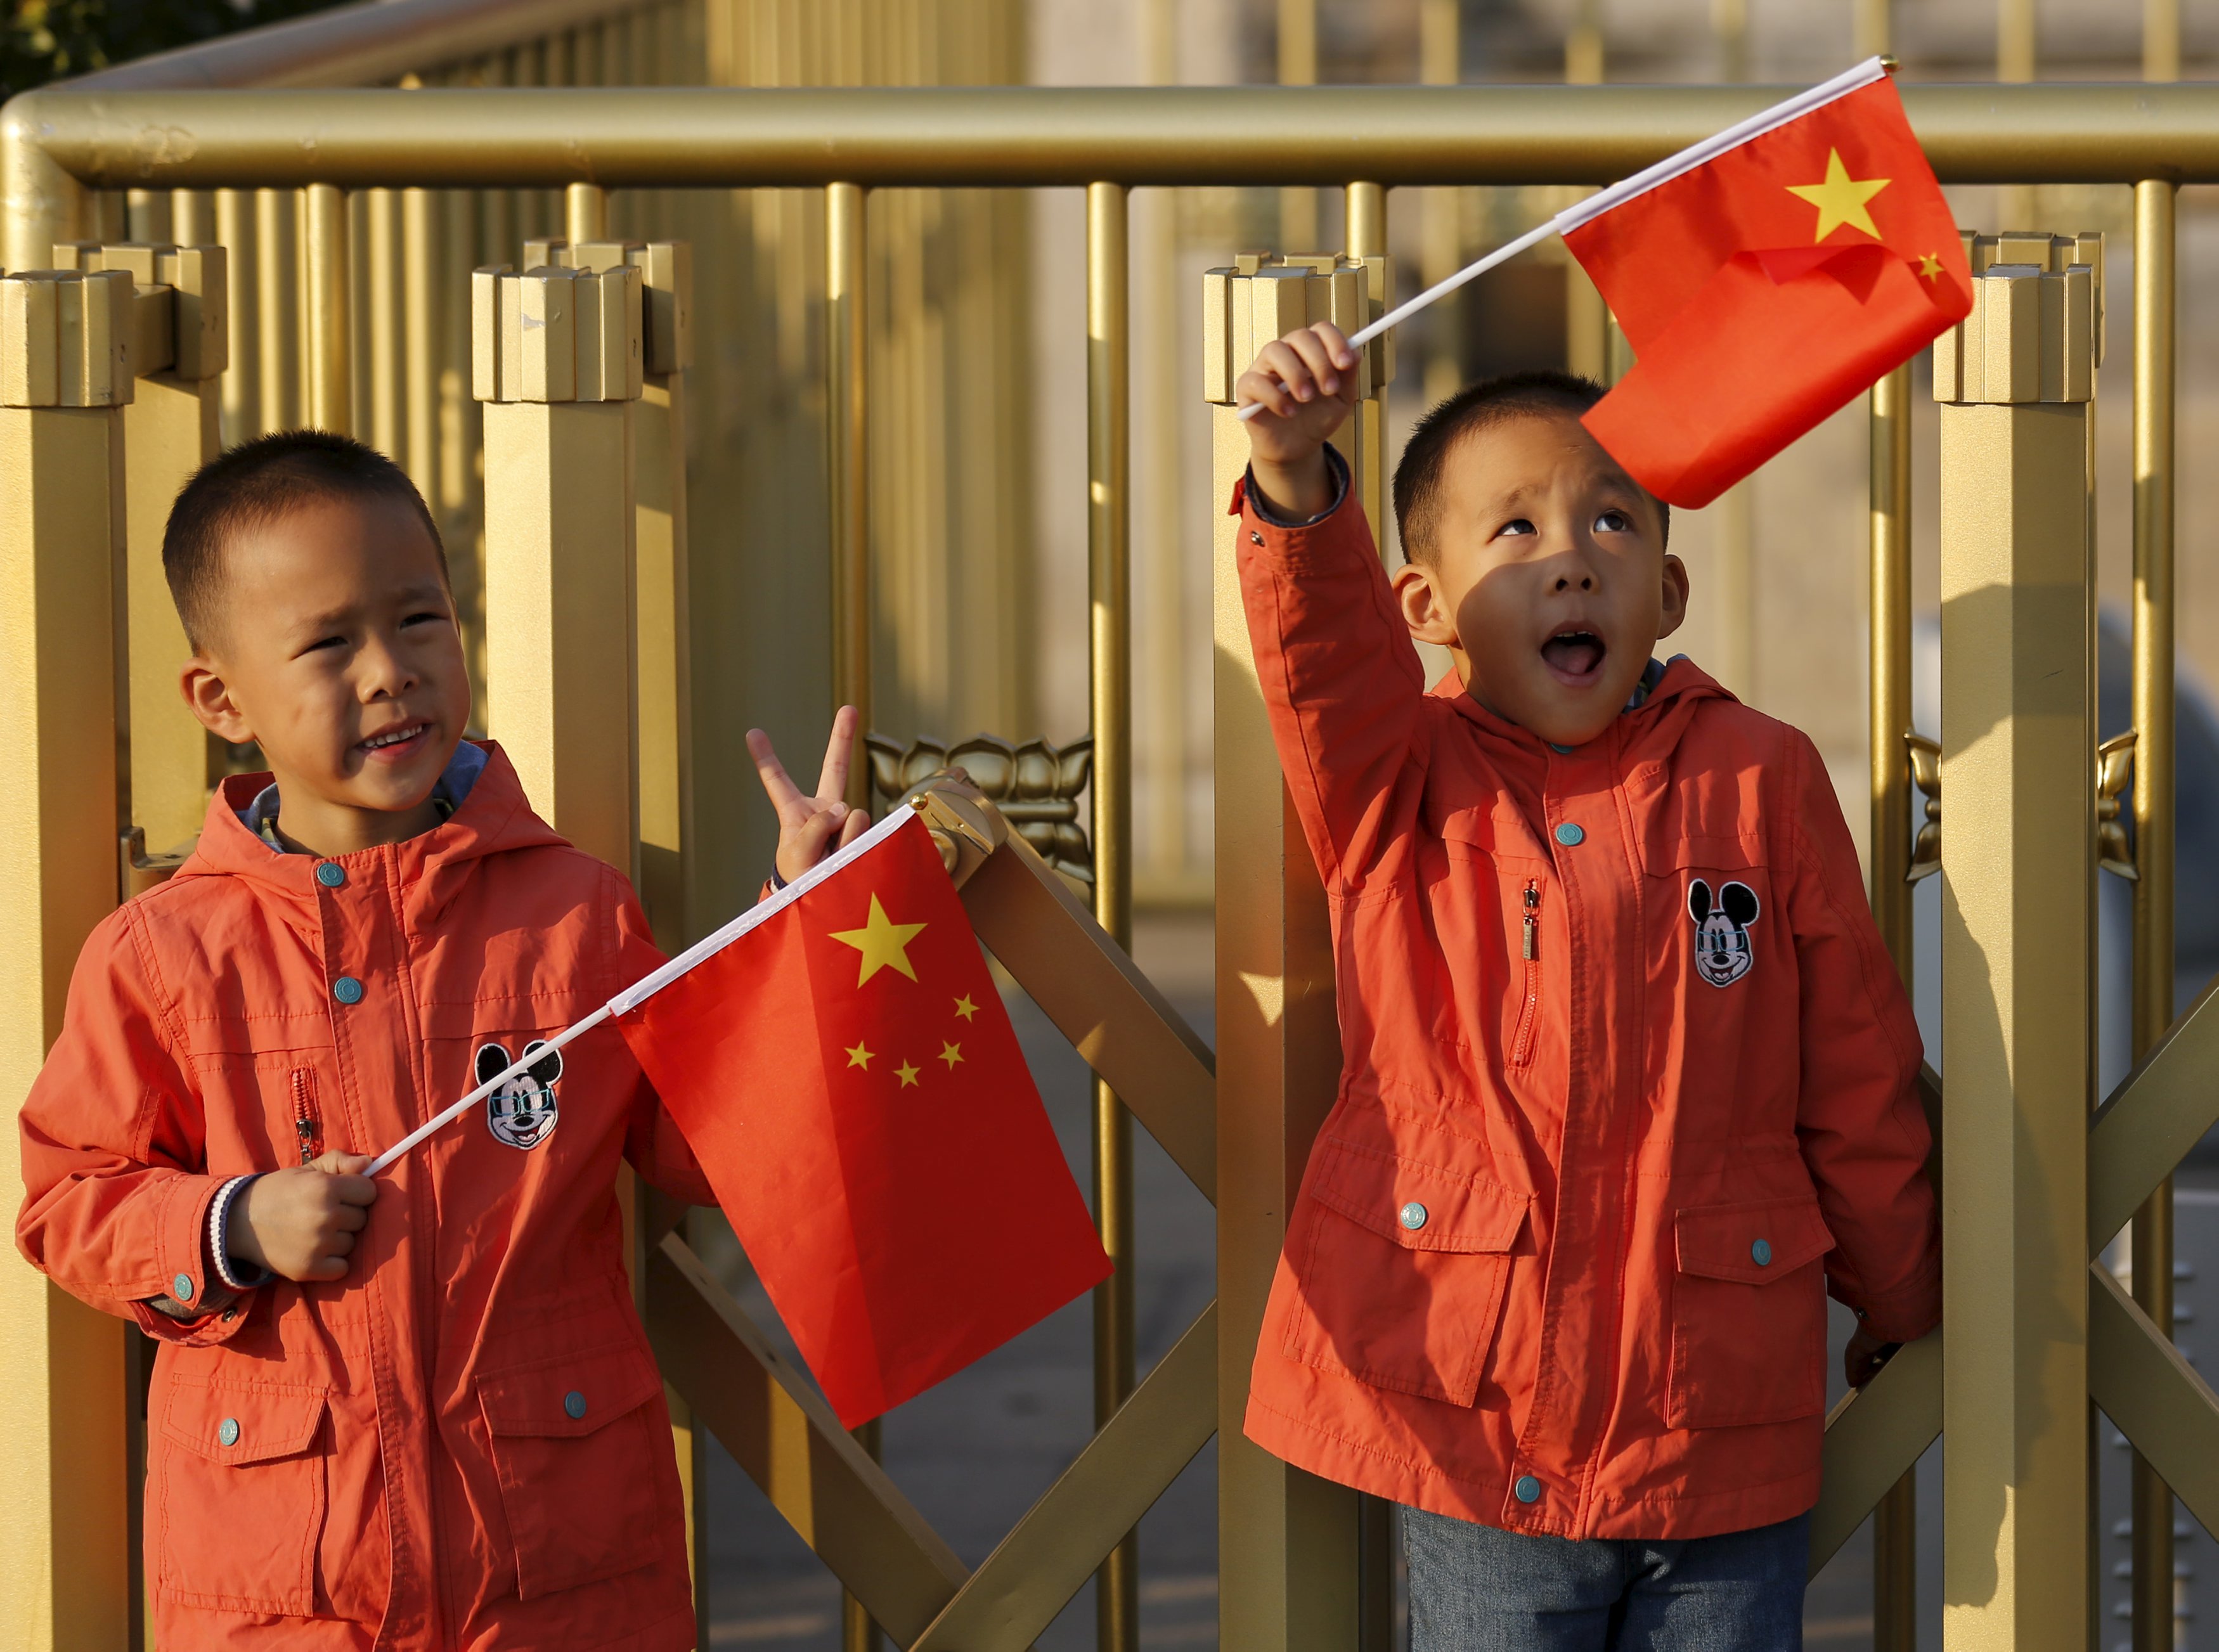 Twin boys Sun Qiyu and Sun Qichun hold China's national flags on the Tiananmen Gate in Beijing November 2, 2015. China must continue to enforce its one-child policy until new rules allowing all couples to have two children go into effect, the top family planning body said. The ruling Communist Party said last week that Beijing would loosen its decades-old one-child policy. The plan for the change must be approved by the rubber-stamp parliament during its annual session in March. REUTERS/Kim Kyung-Hoon